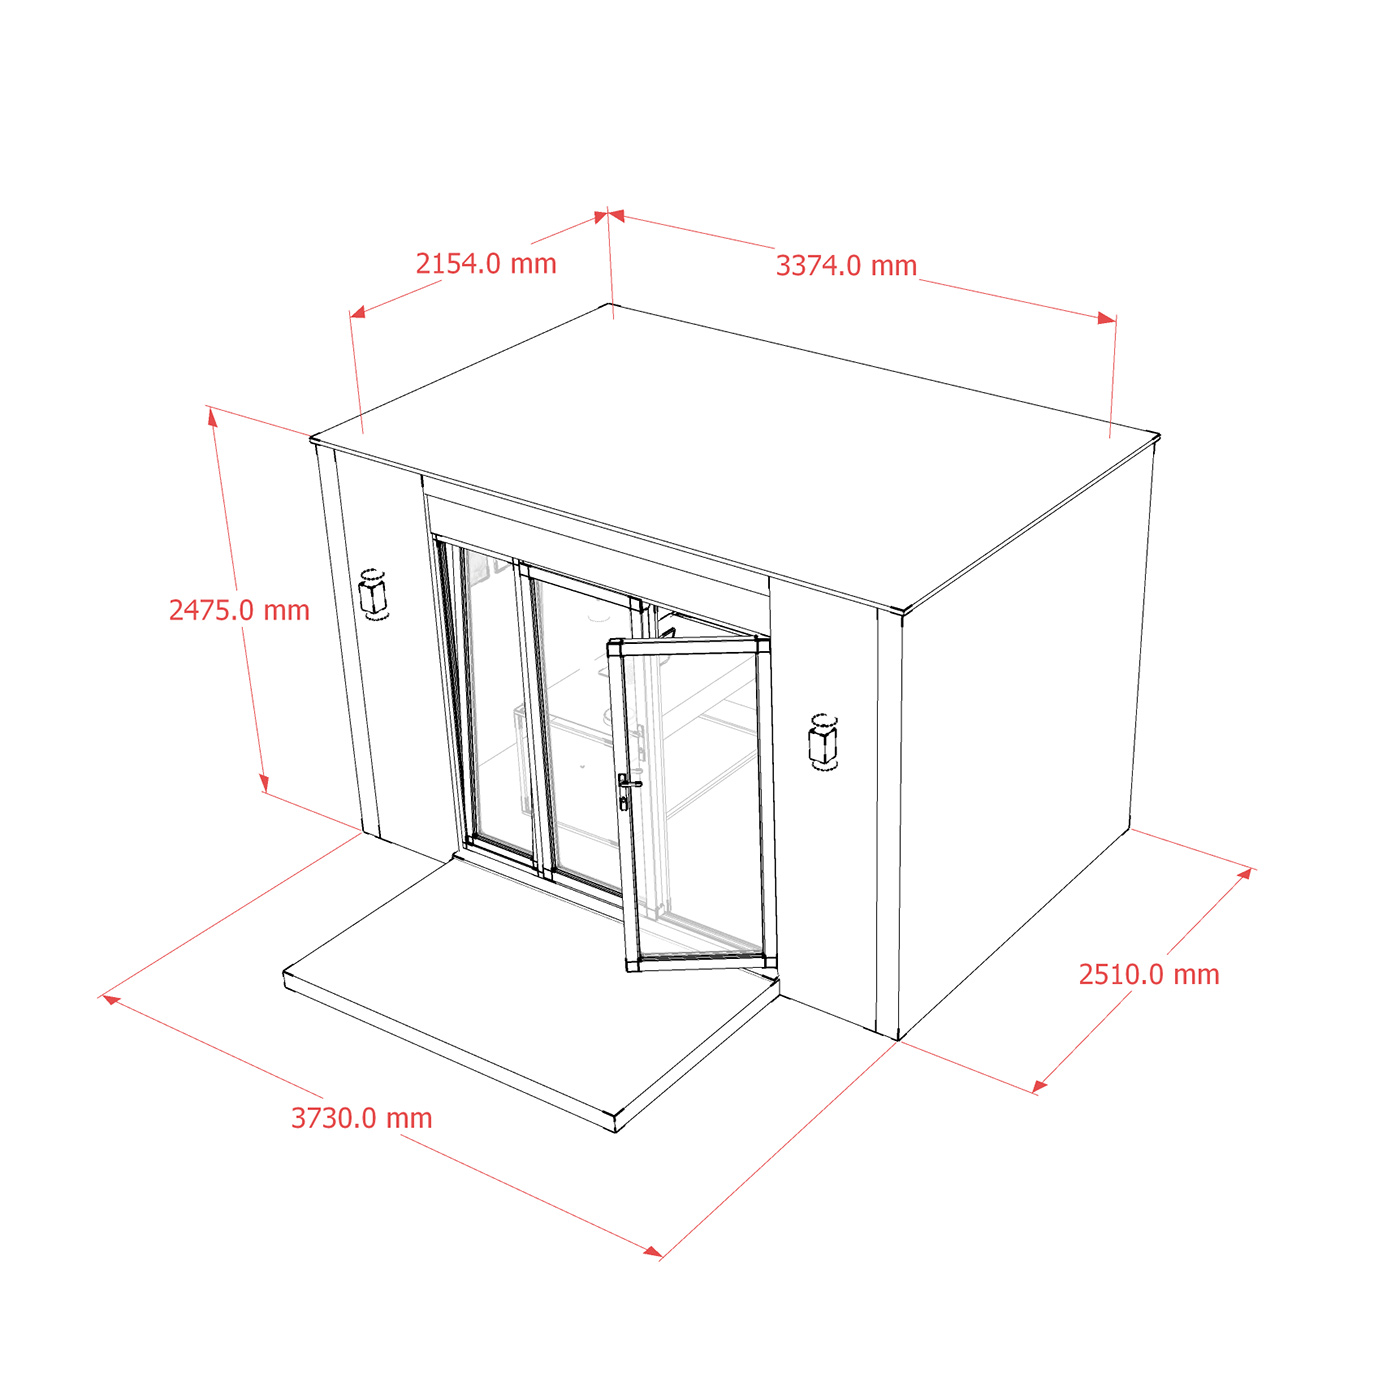 Exterior dimensions of 2.6m by 3.8m garden room